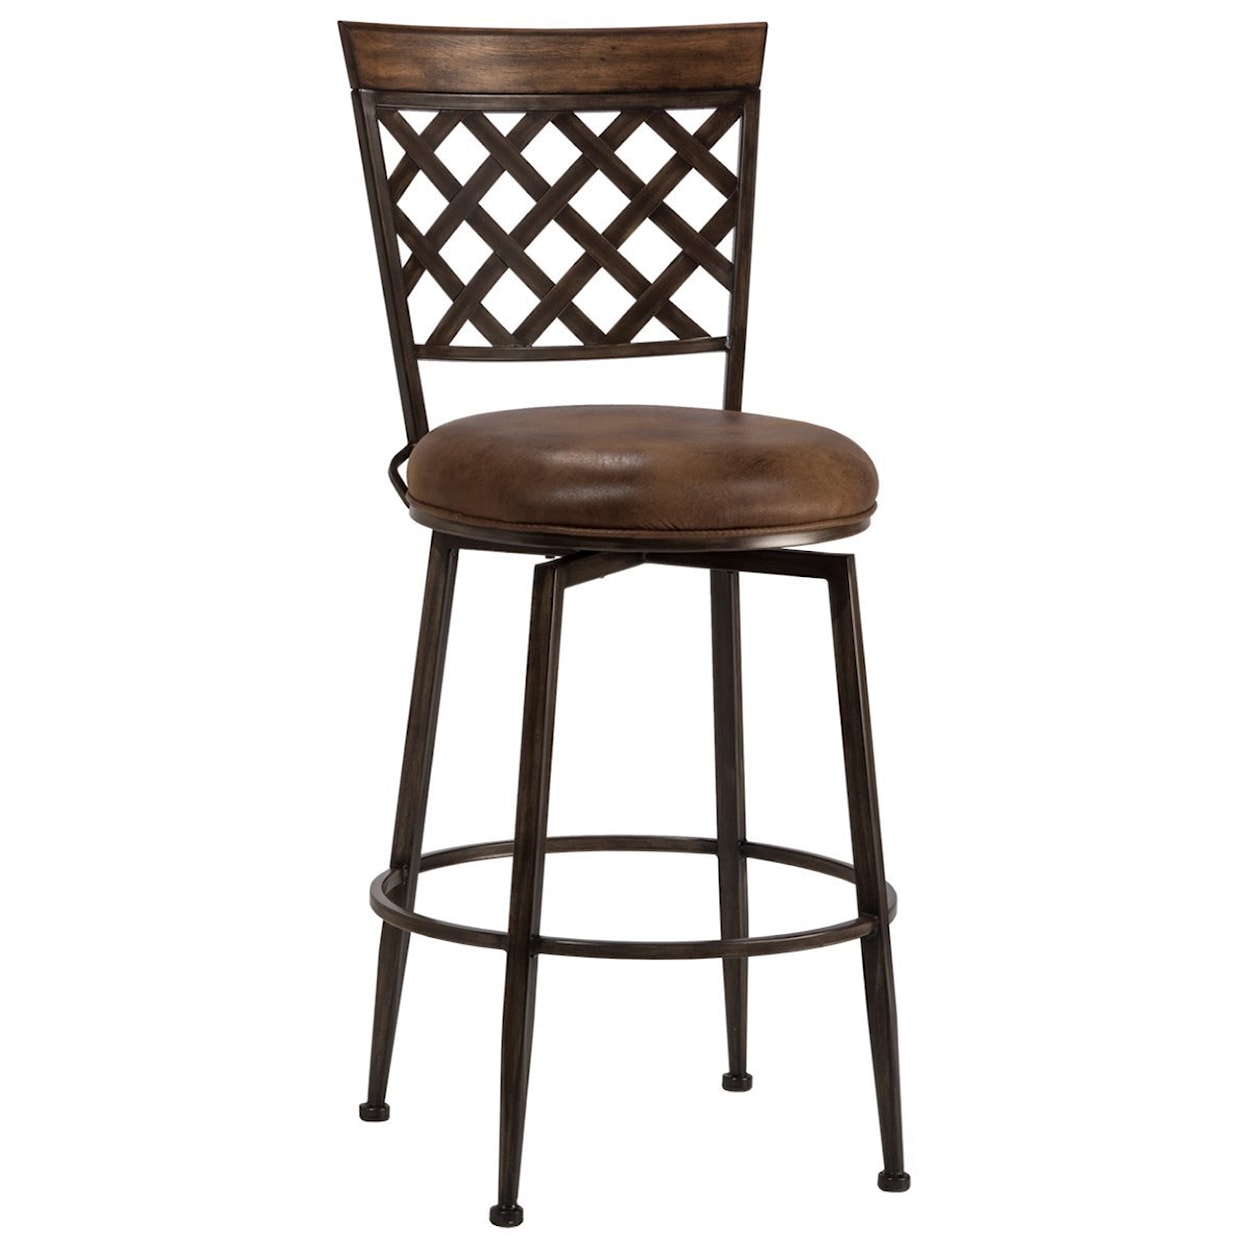 Hillsdale Greenfield Swivel Counter Stool